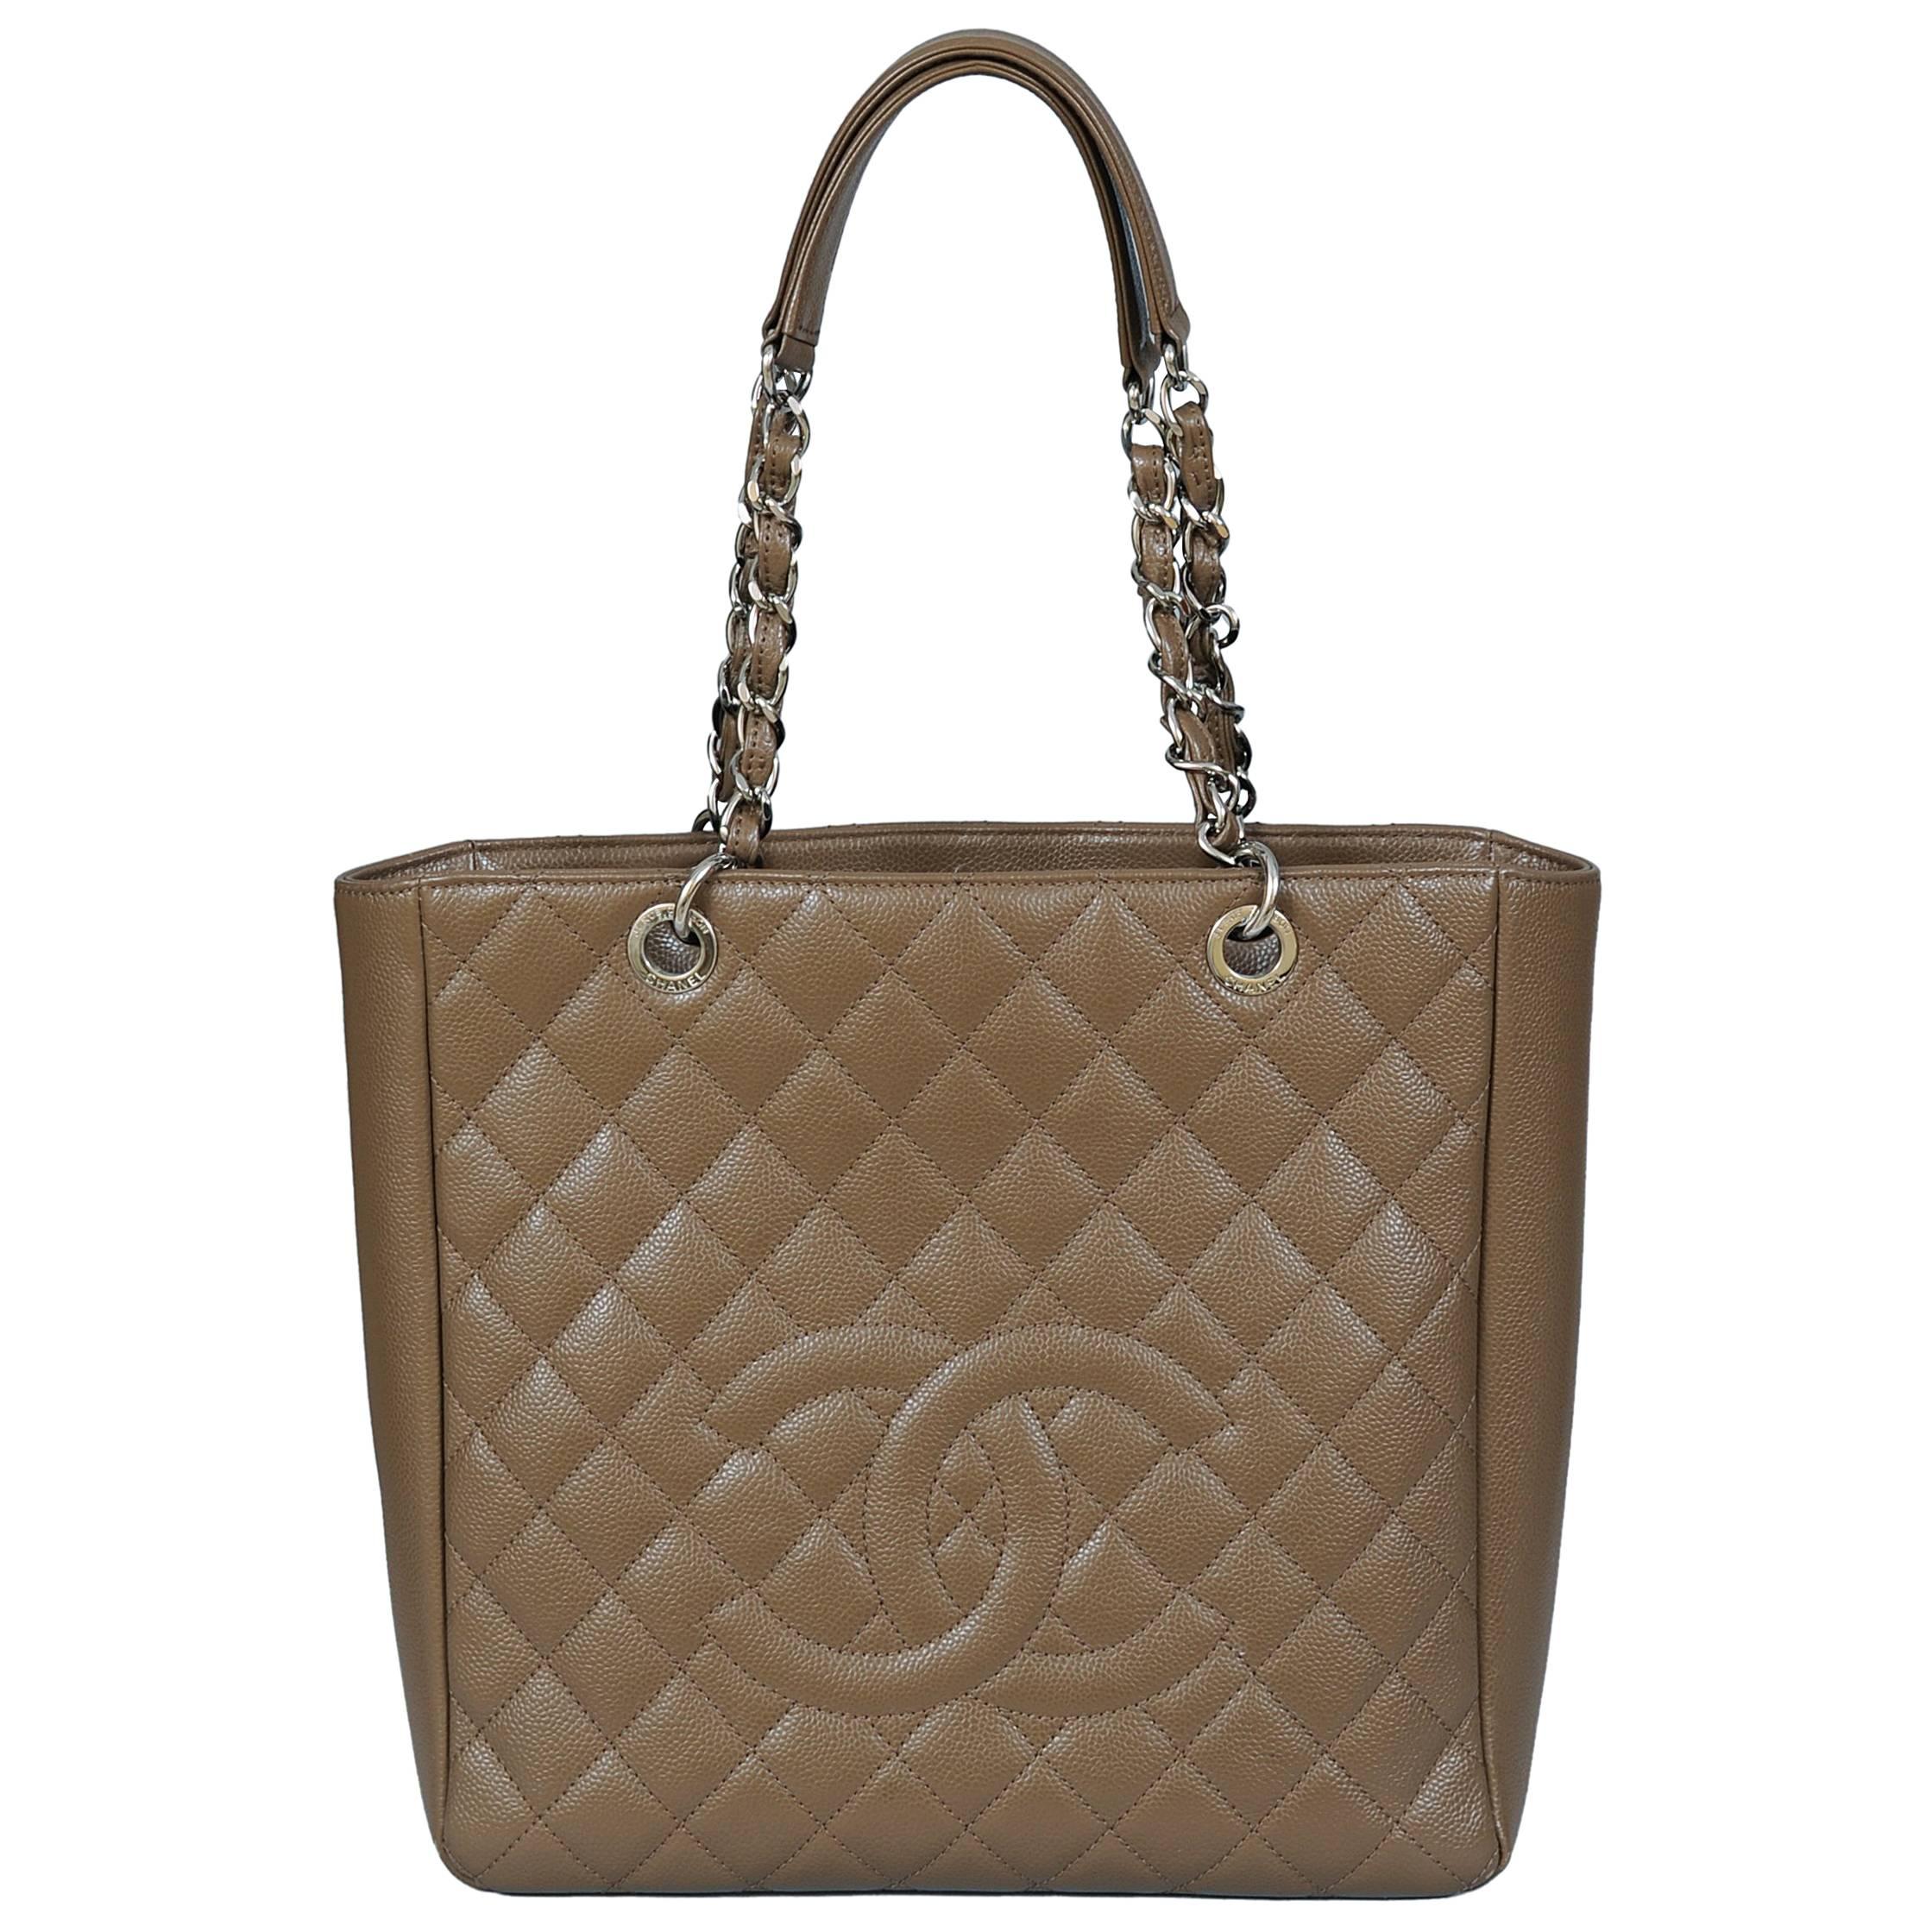 Chanel Large Taupe Caviar Leather Shopping Tote